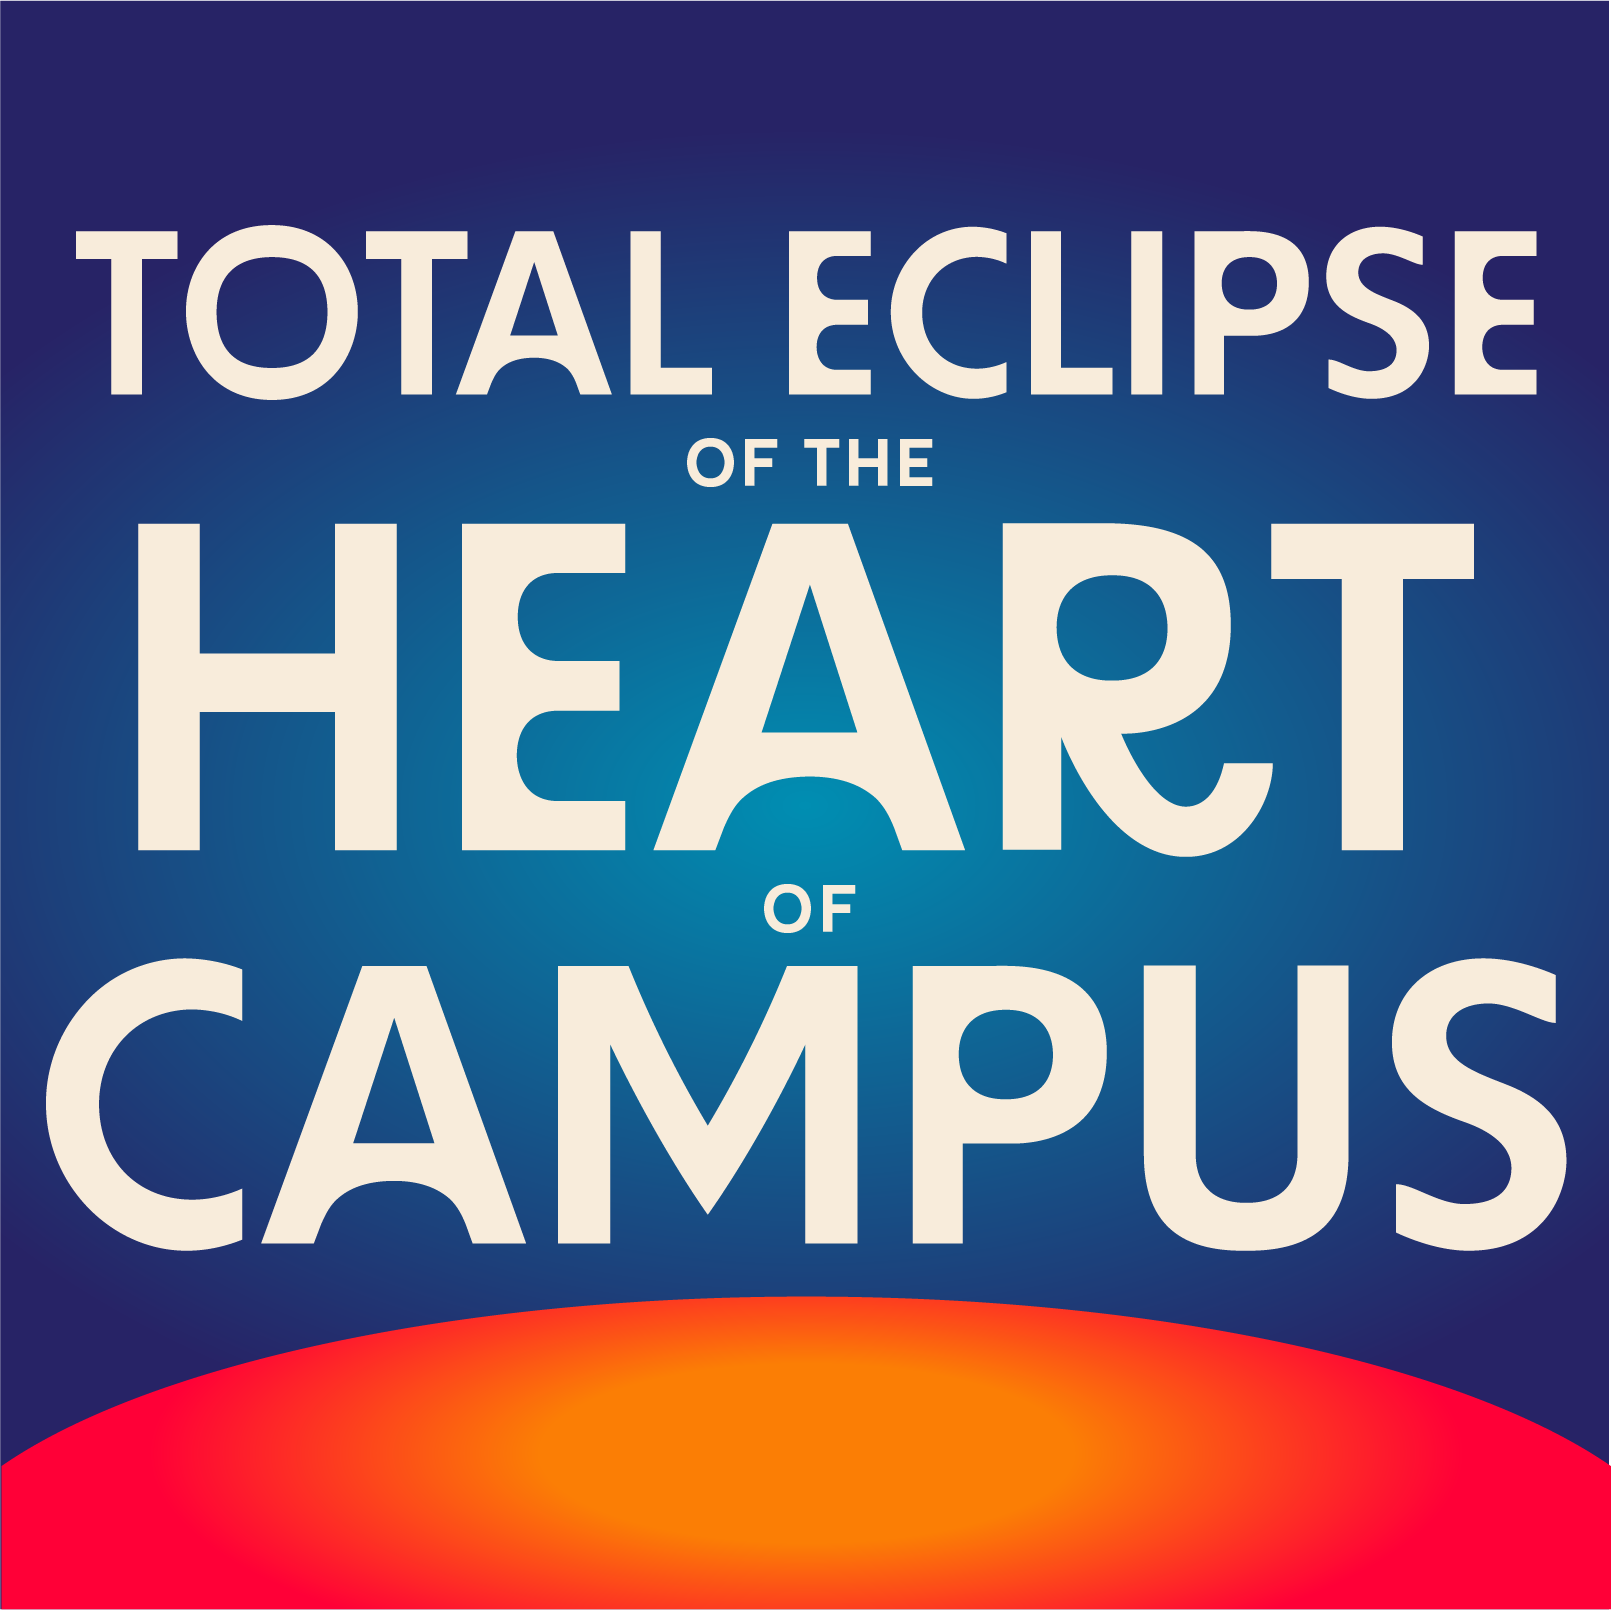 Image shows a blue gradient background with an orange gradient sun. Text on image reads "Total Eclipse of The Heart of Campus"